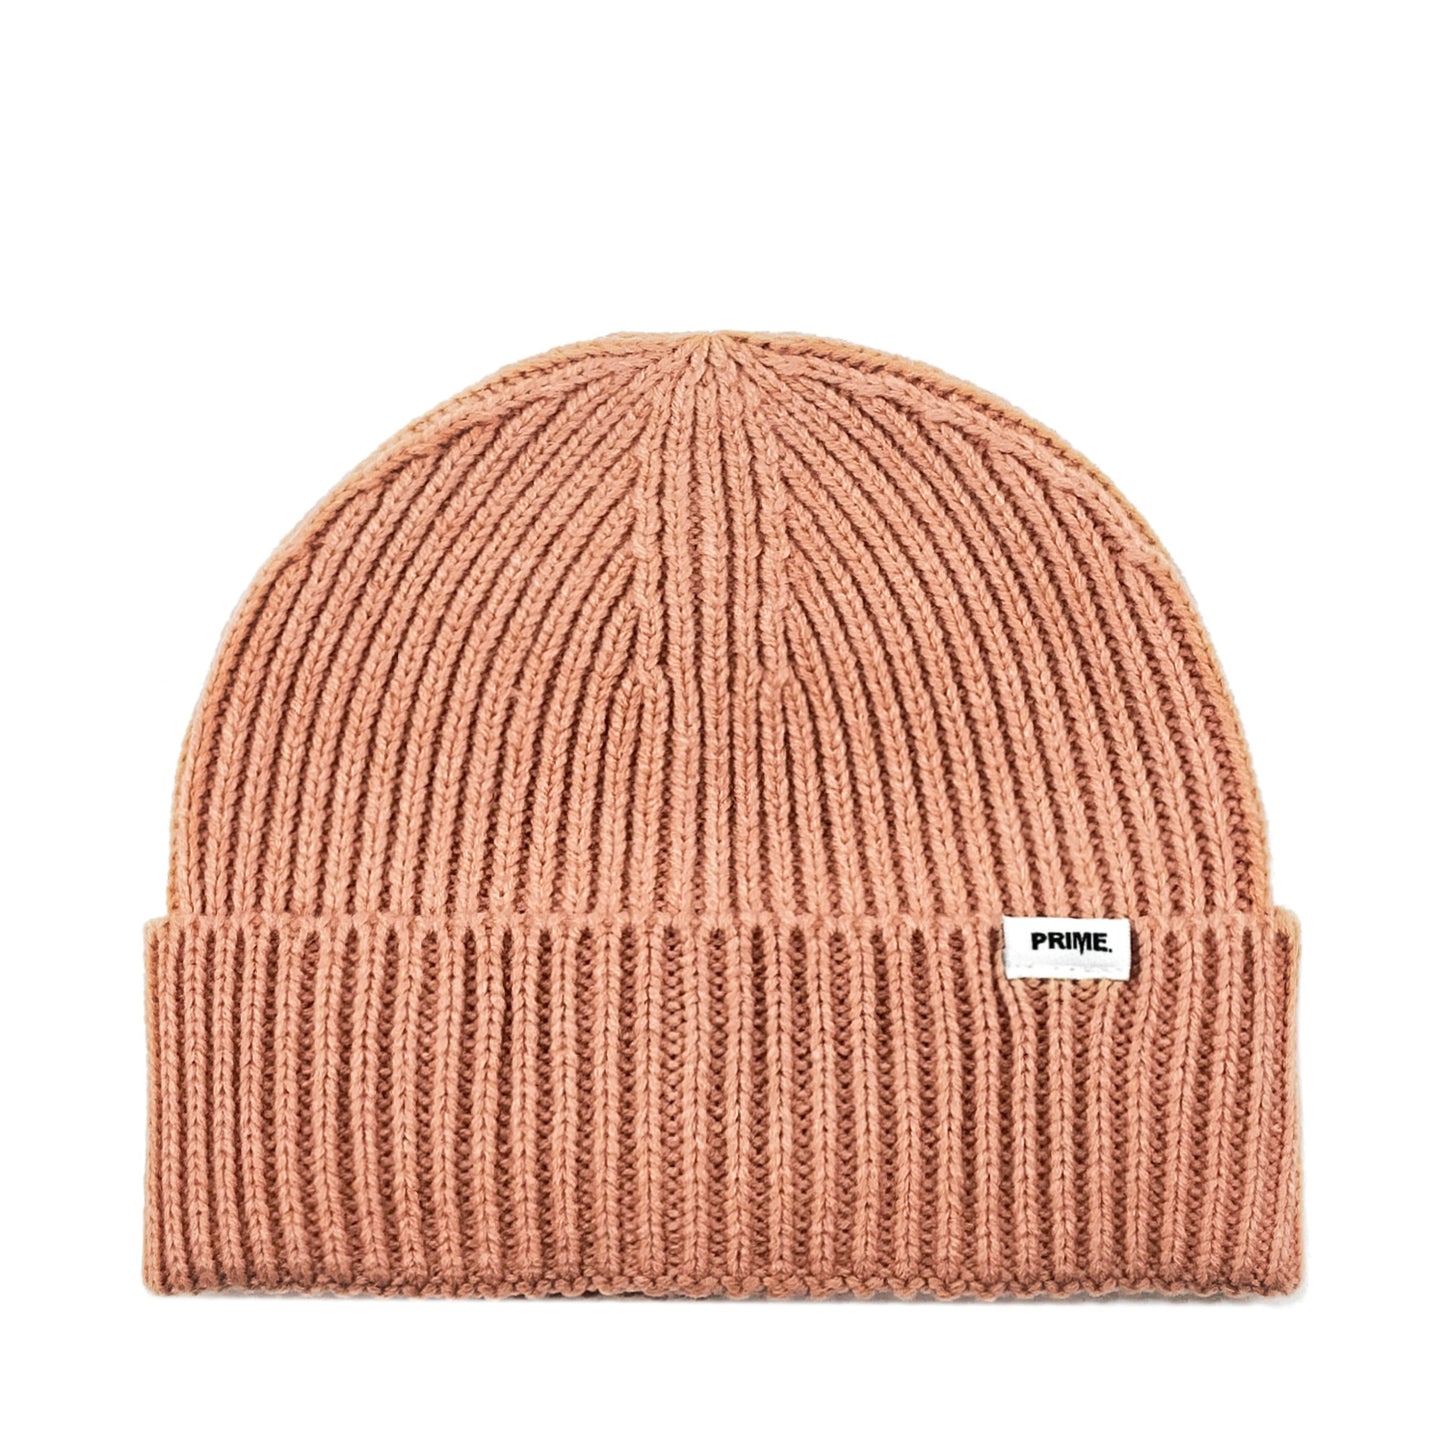 Prime Delux Cable Knit Beanie - Pink - Prime Delux Store